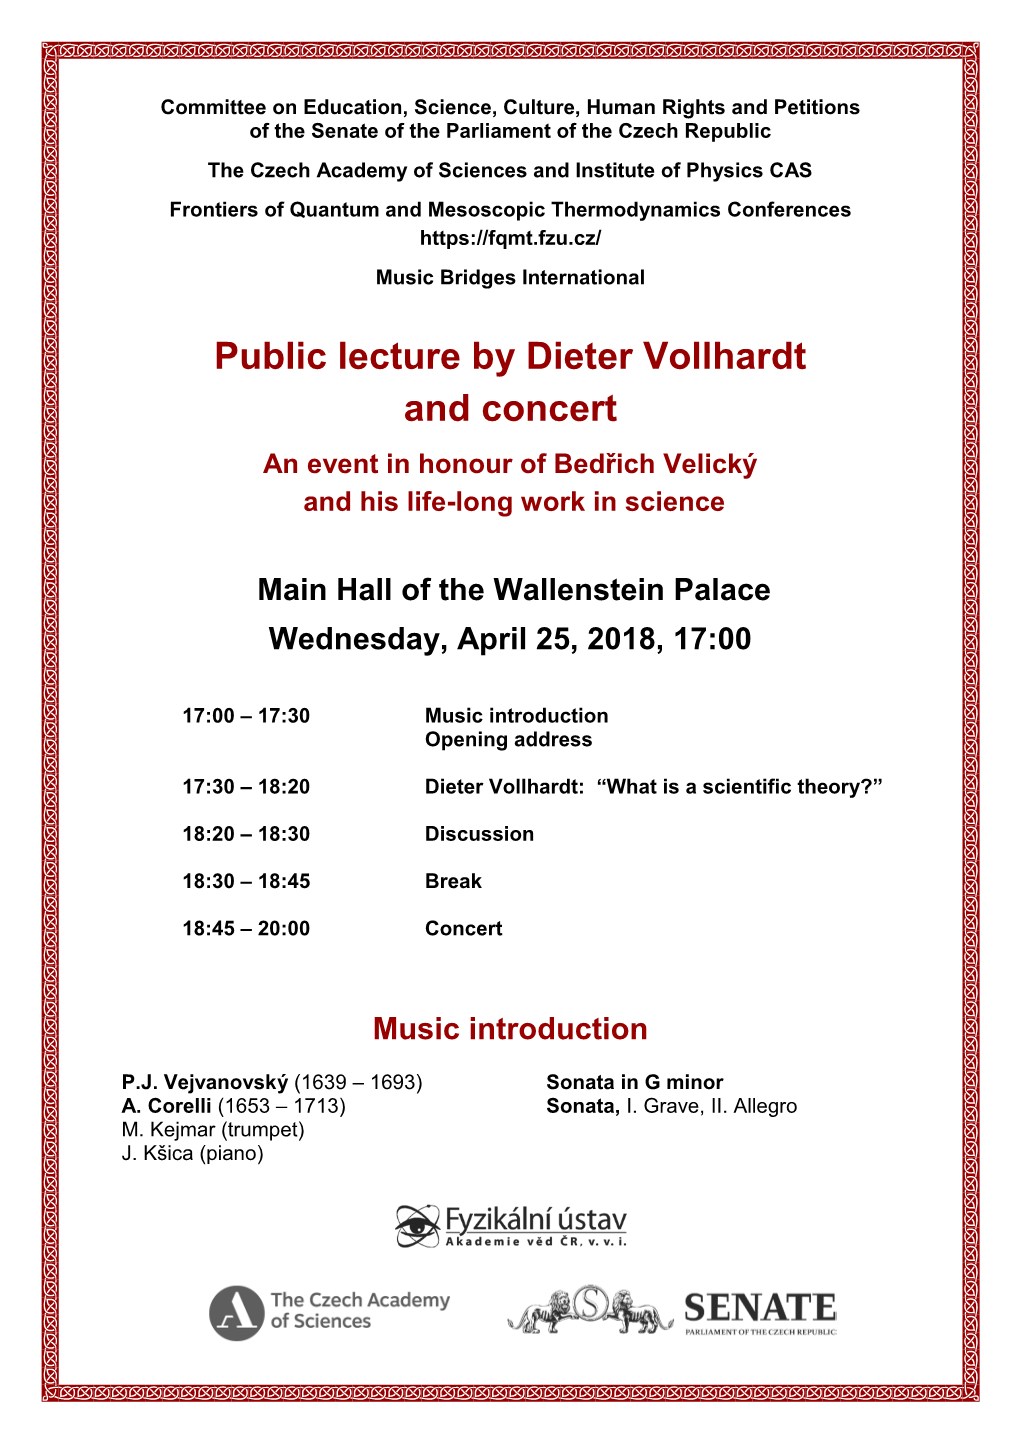 Public Lecture by Dieter Vollhardt and Concert an Event in Honour of Bedřich Velický and His Life-Long Work in Science